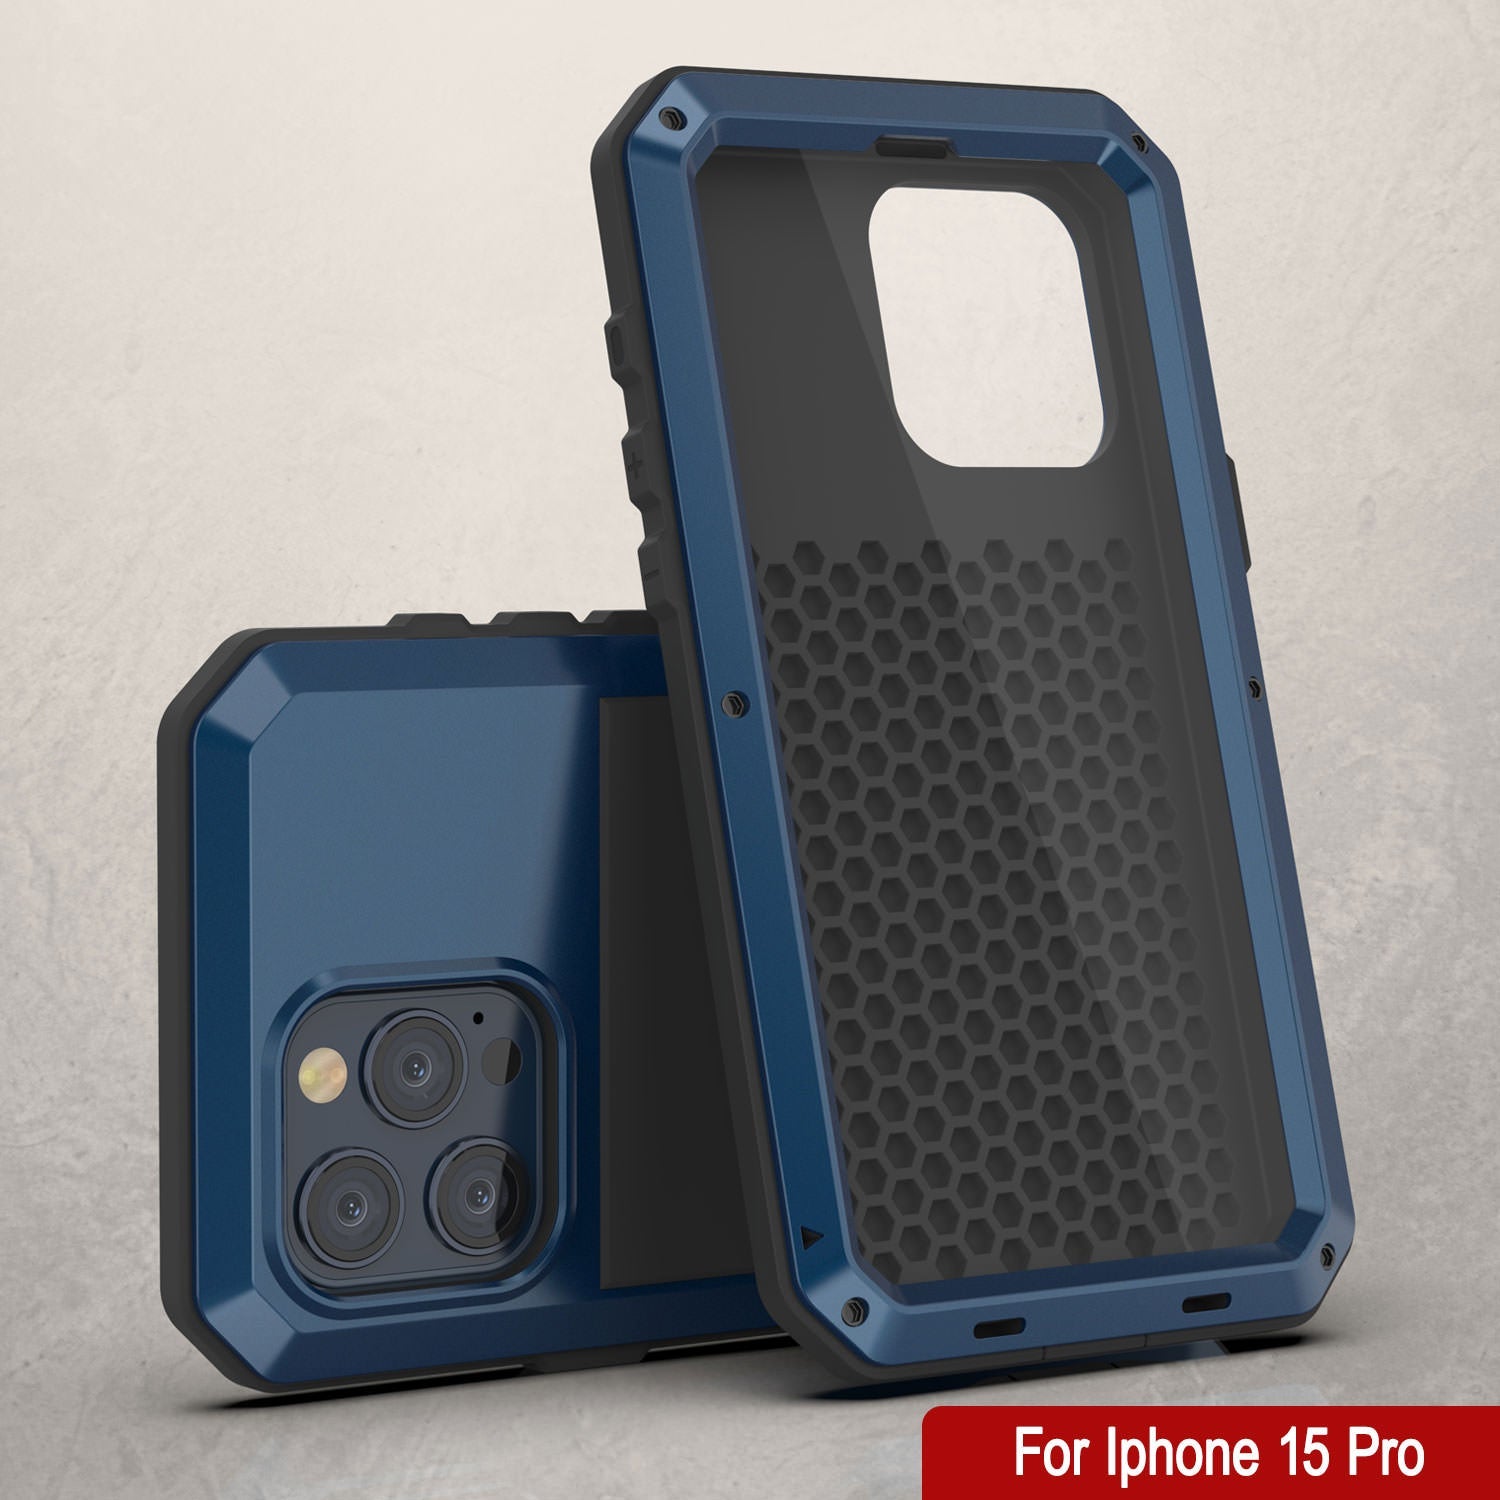 iPhone 15 Pro Metal Case, Heavy Duty Military Grade Armor Cover [shock proof] Full Body Hard [Blue]